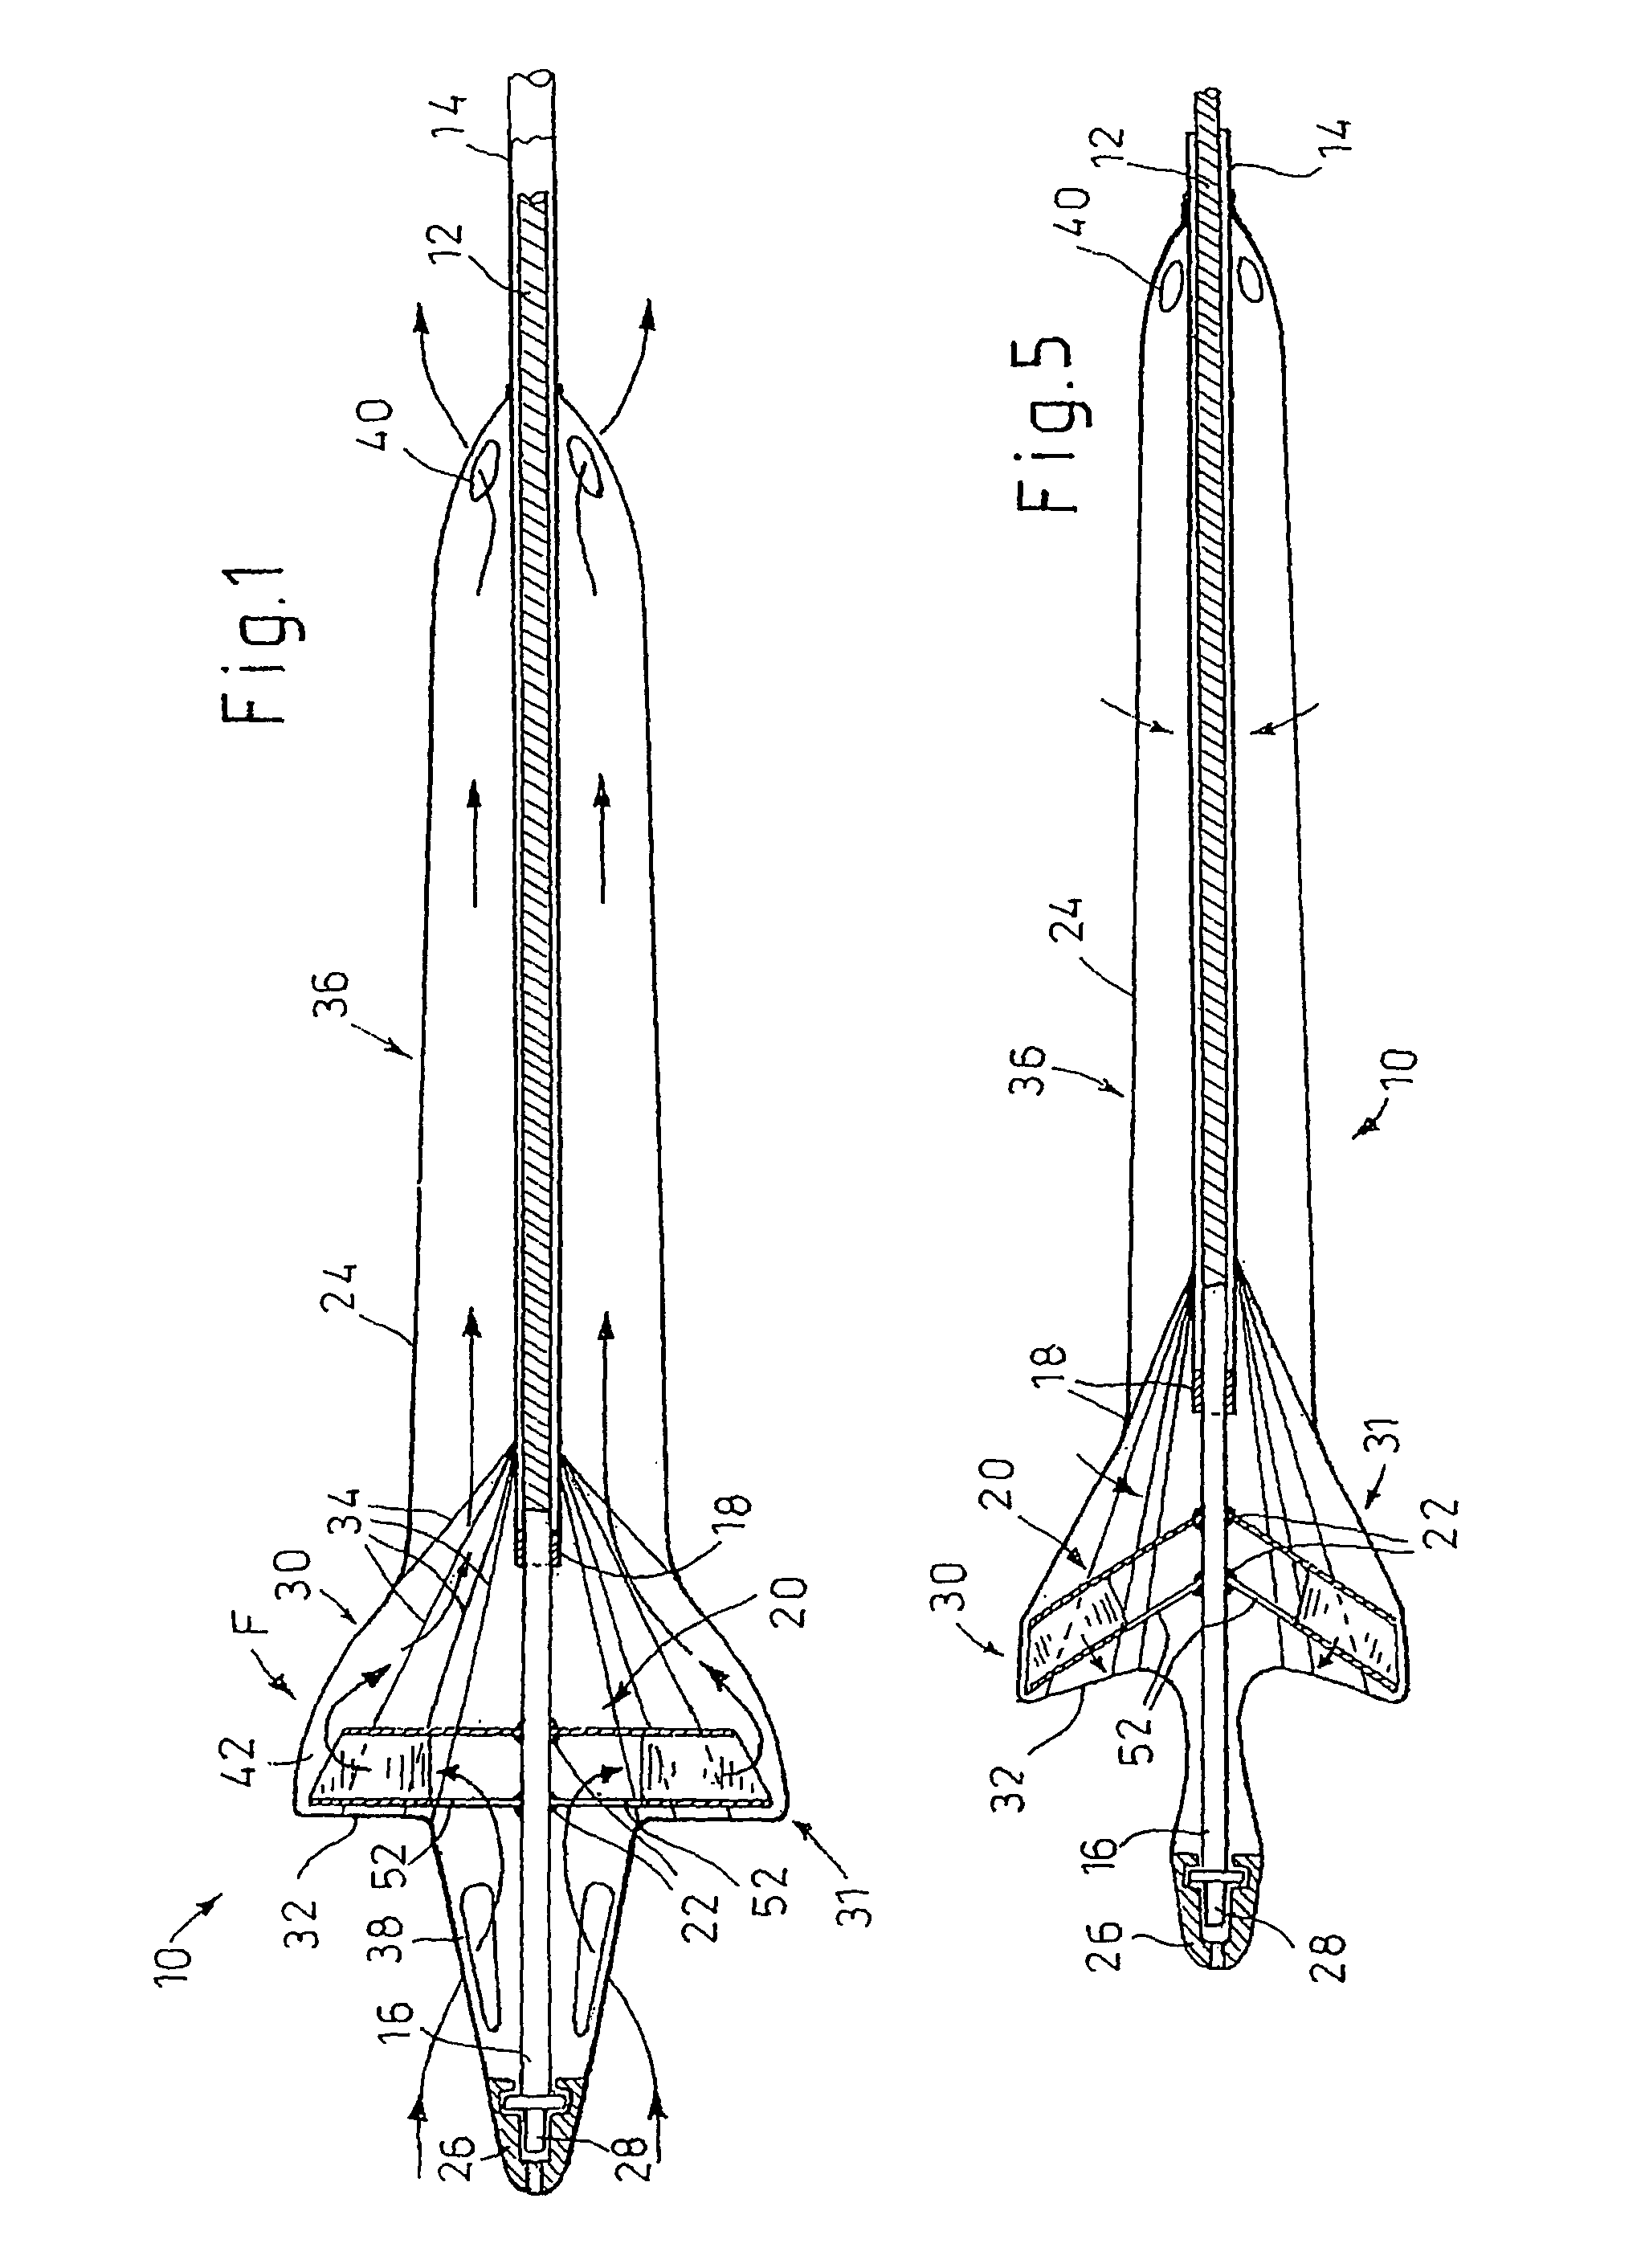 Foldable intravascularly inserted blood pump